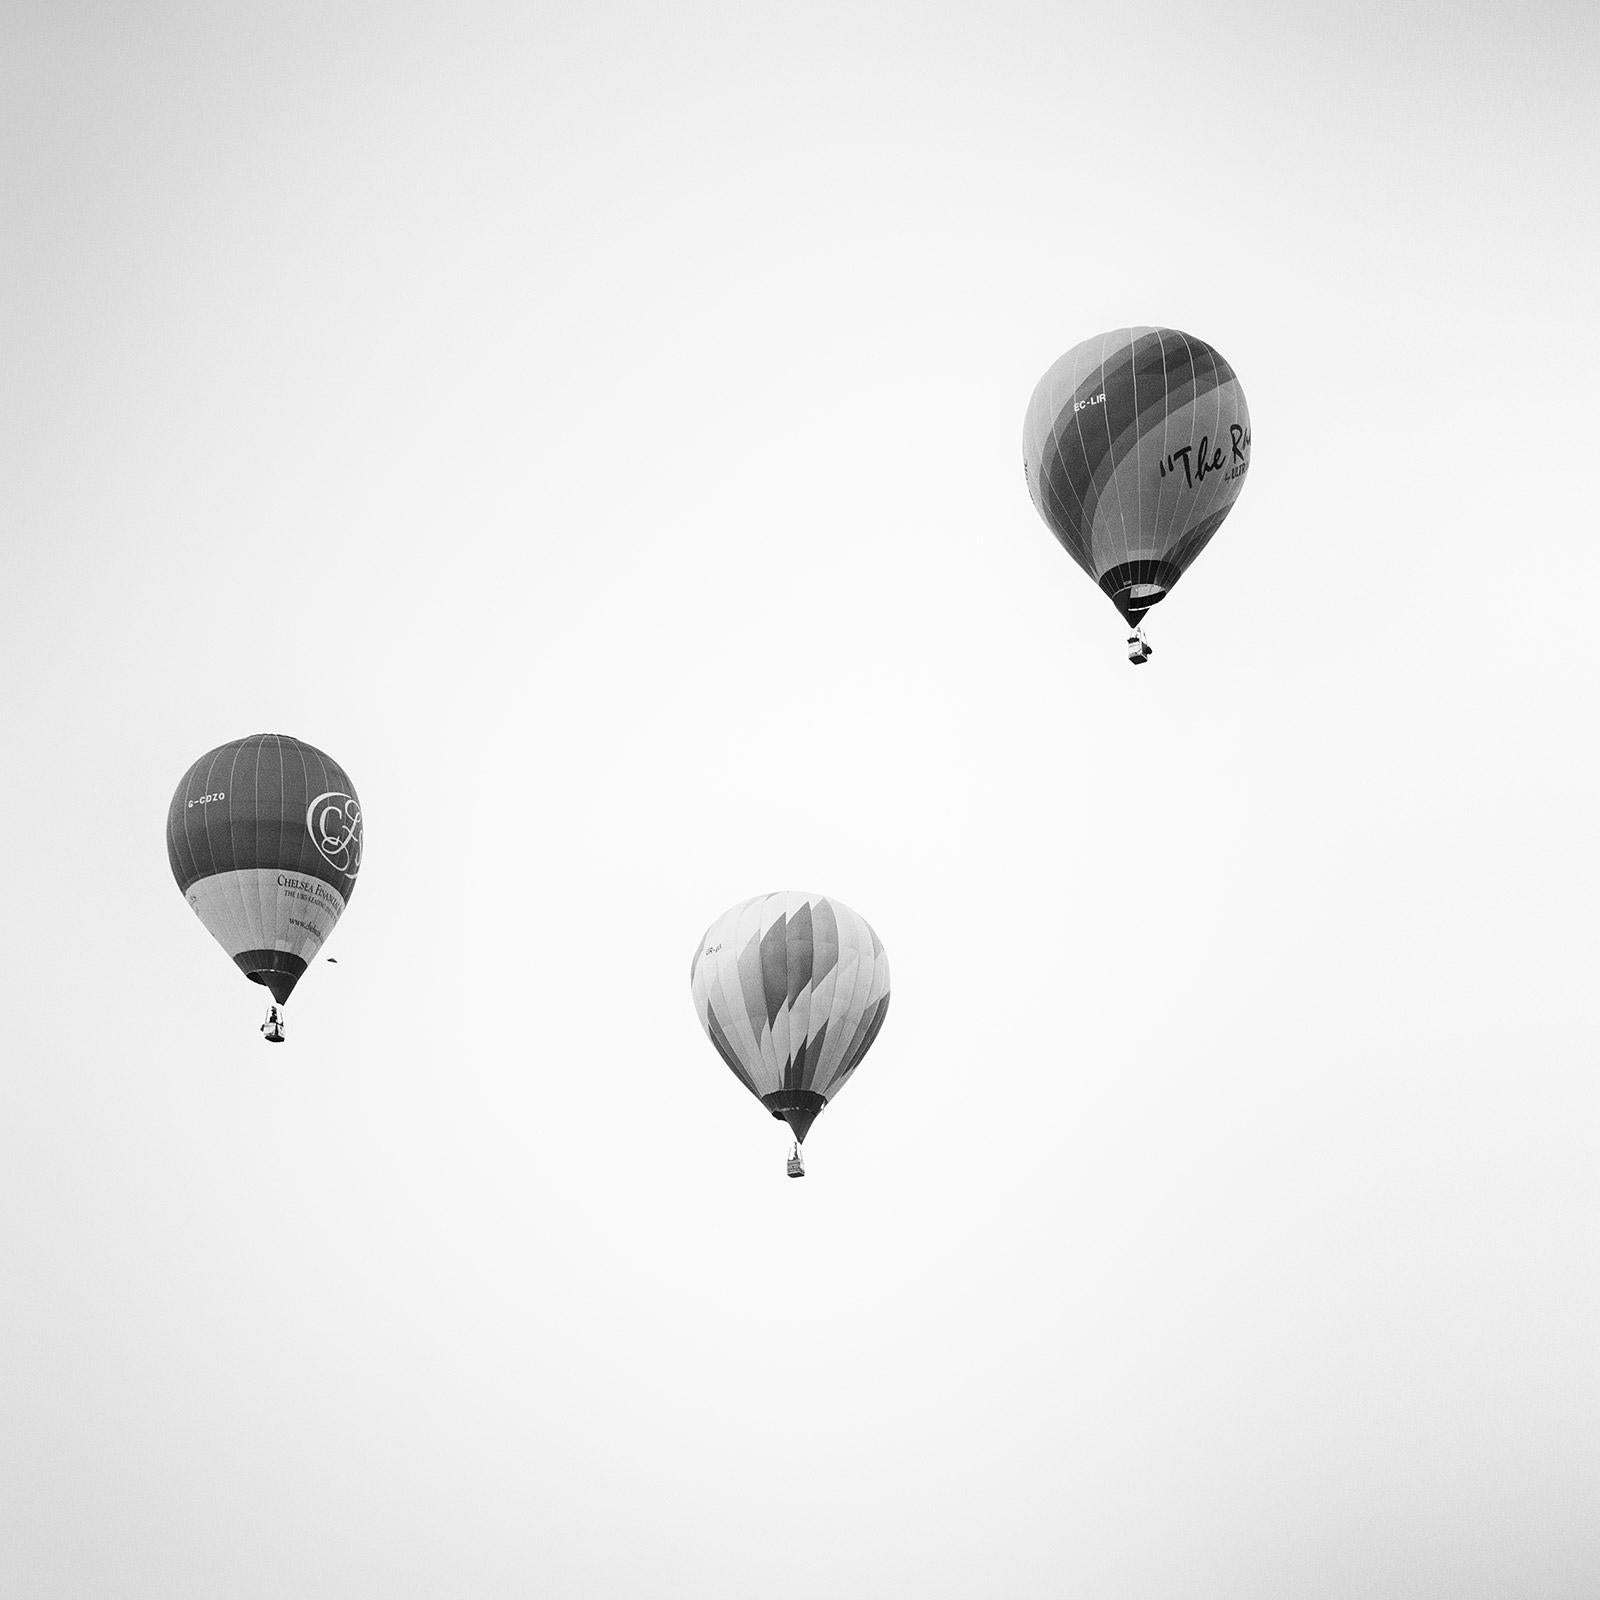 Gerald Berghammer Black and White Photograph - Hot Air Balloon, Championship, minimalist black and white photography, landscape